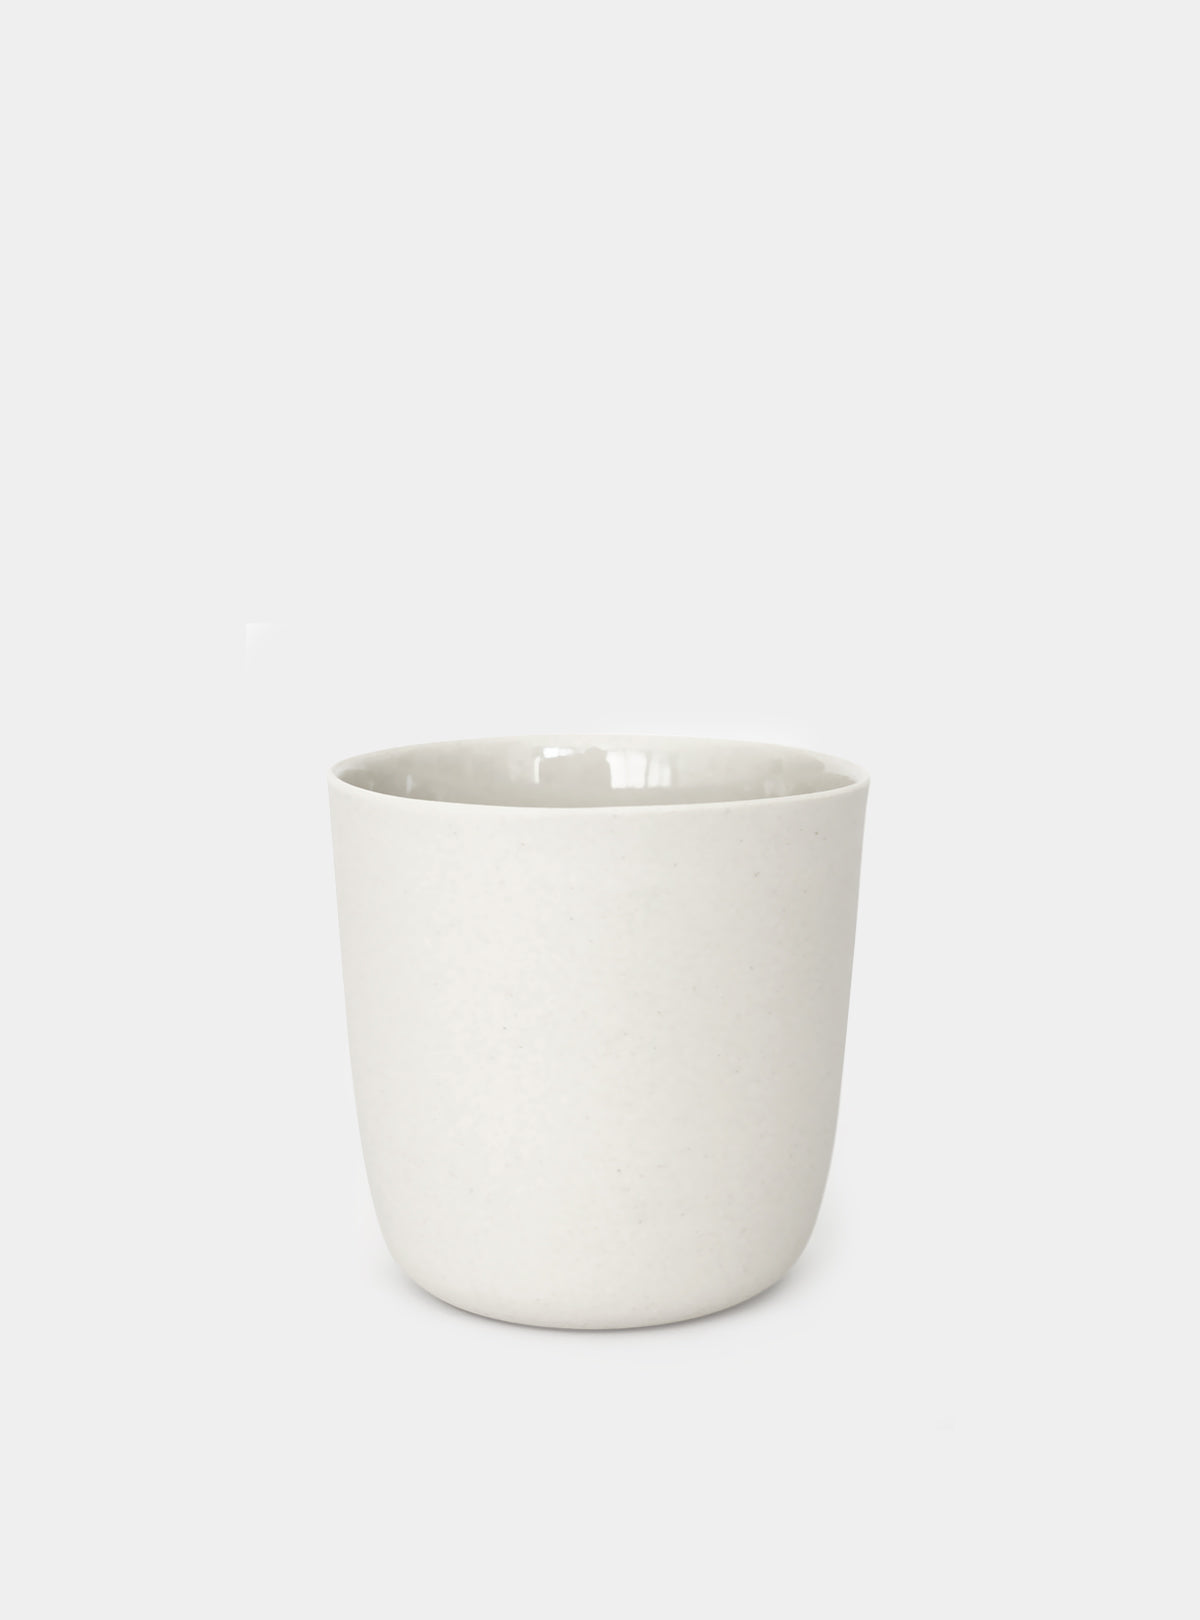 Maas Cup White - Set of two